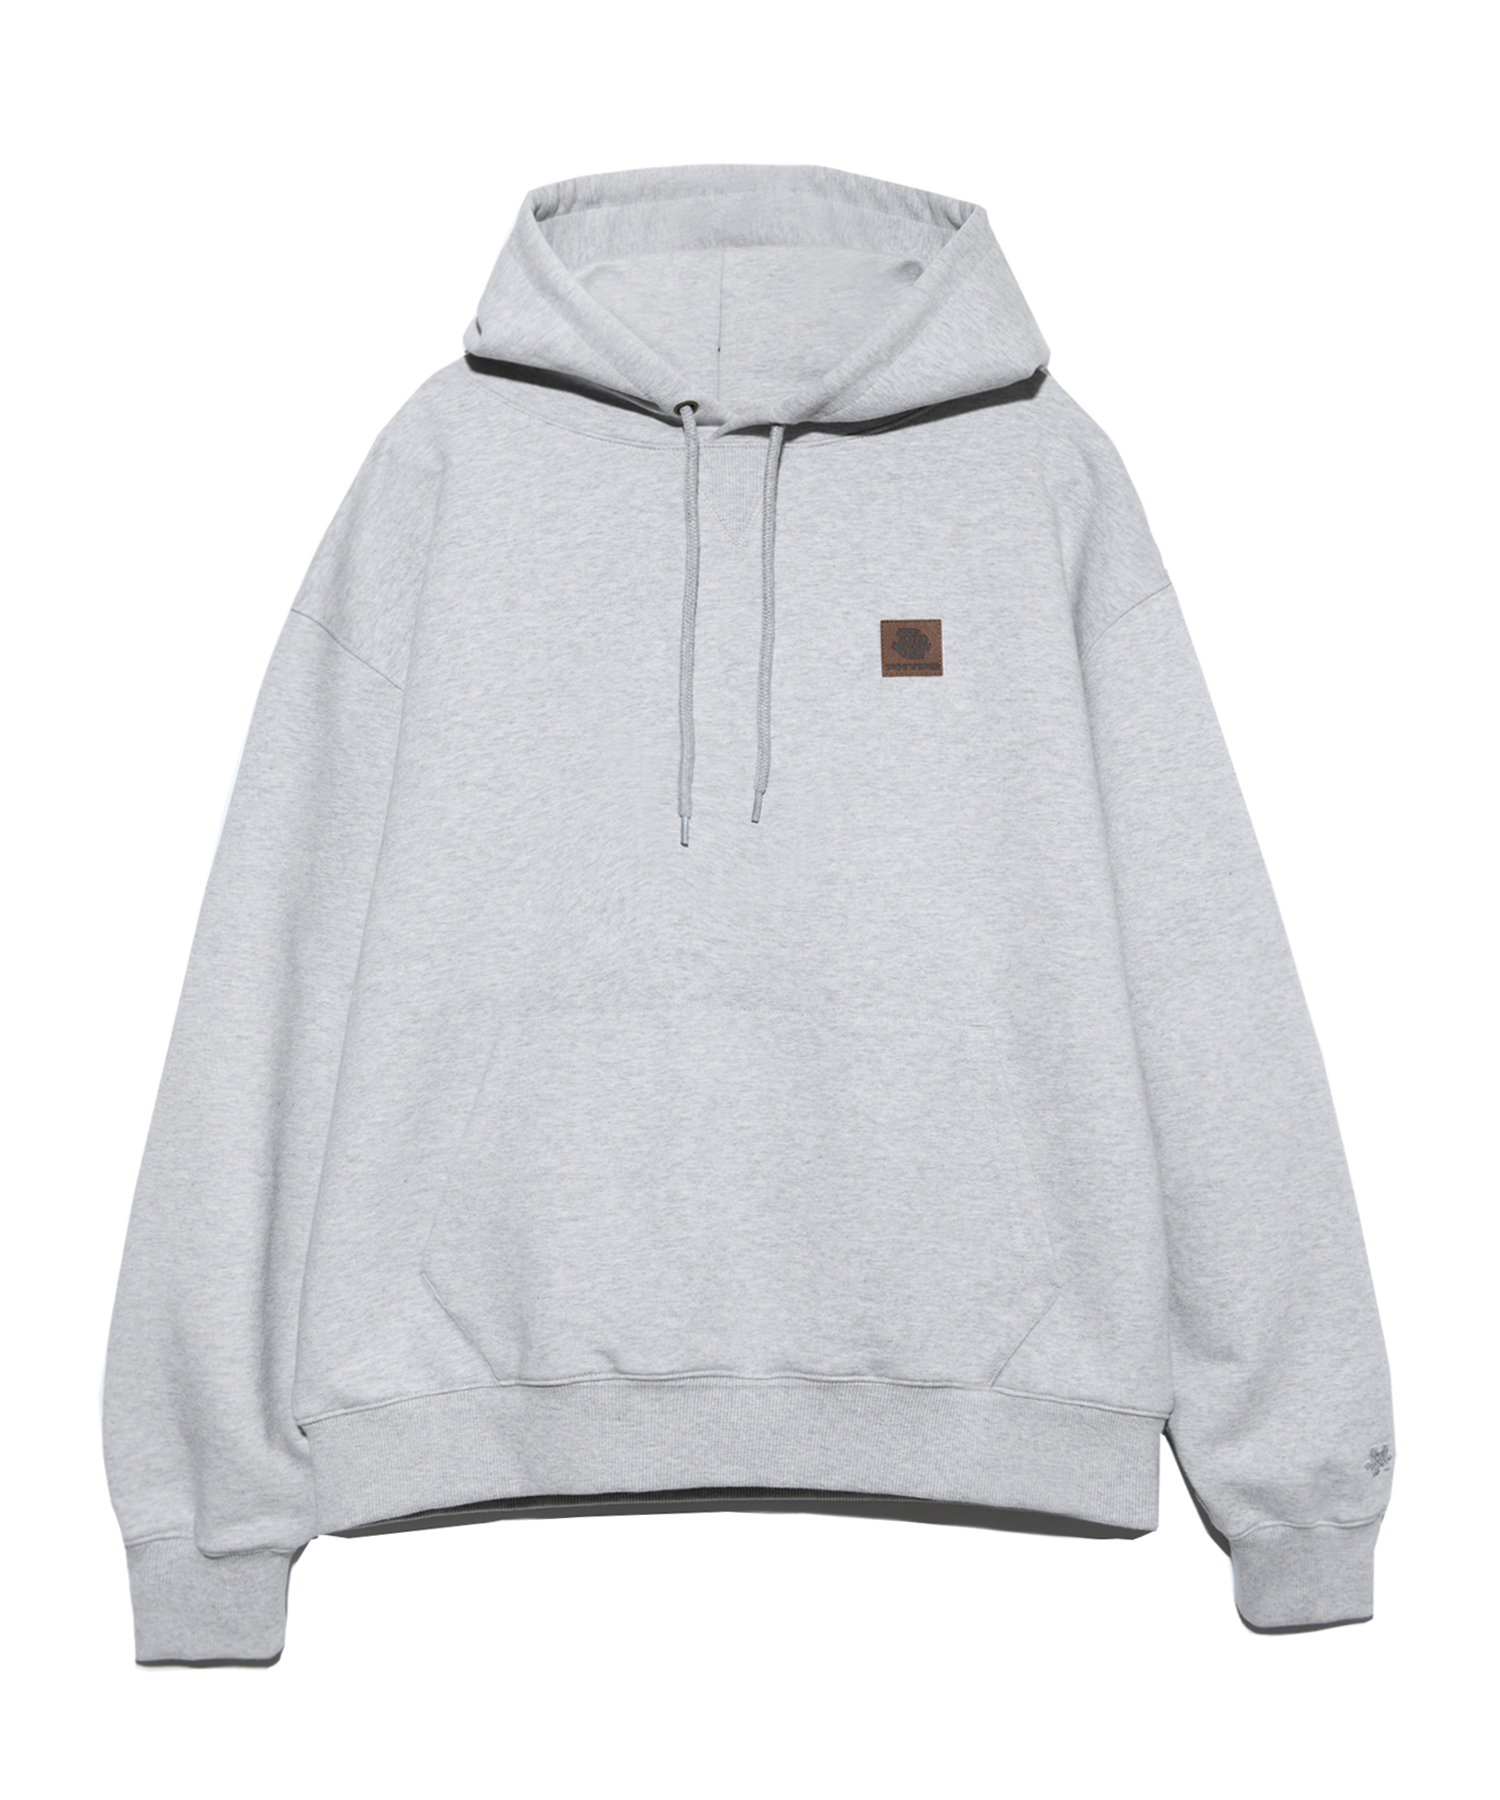 LEATHER LABEL HOODIE GRAY